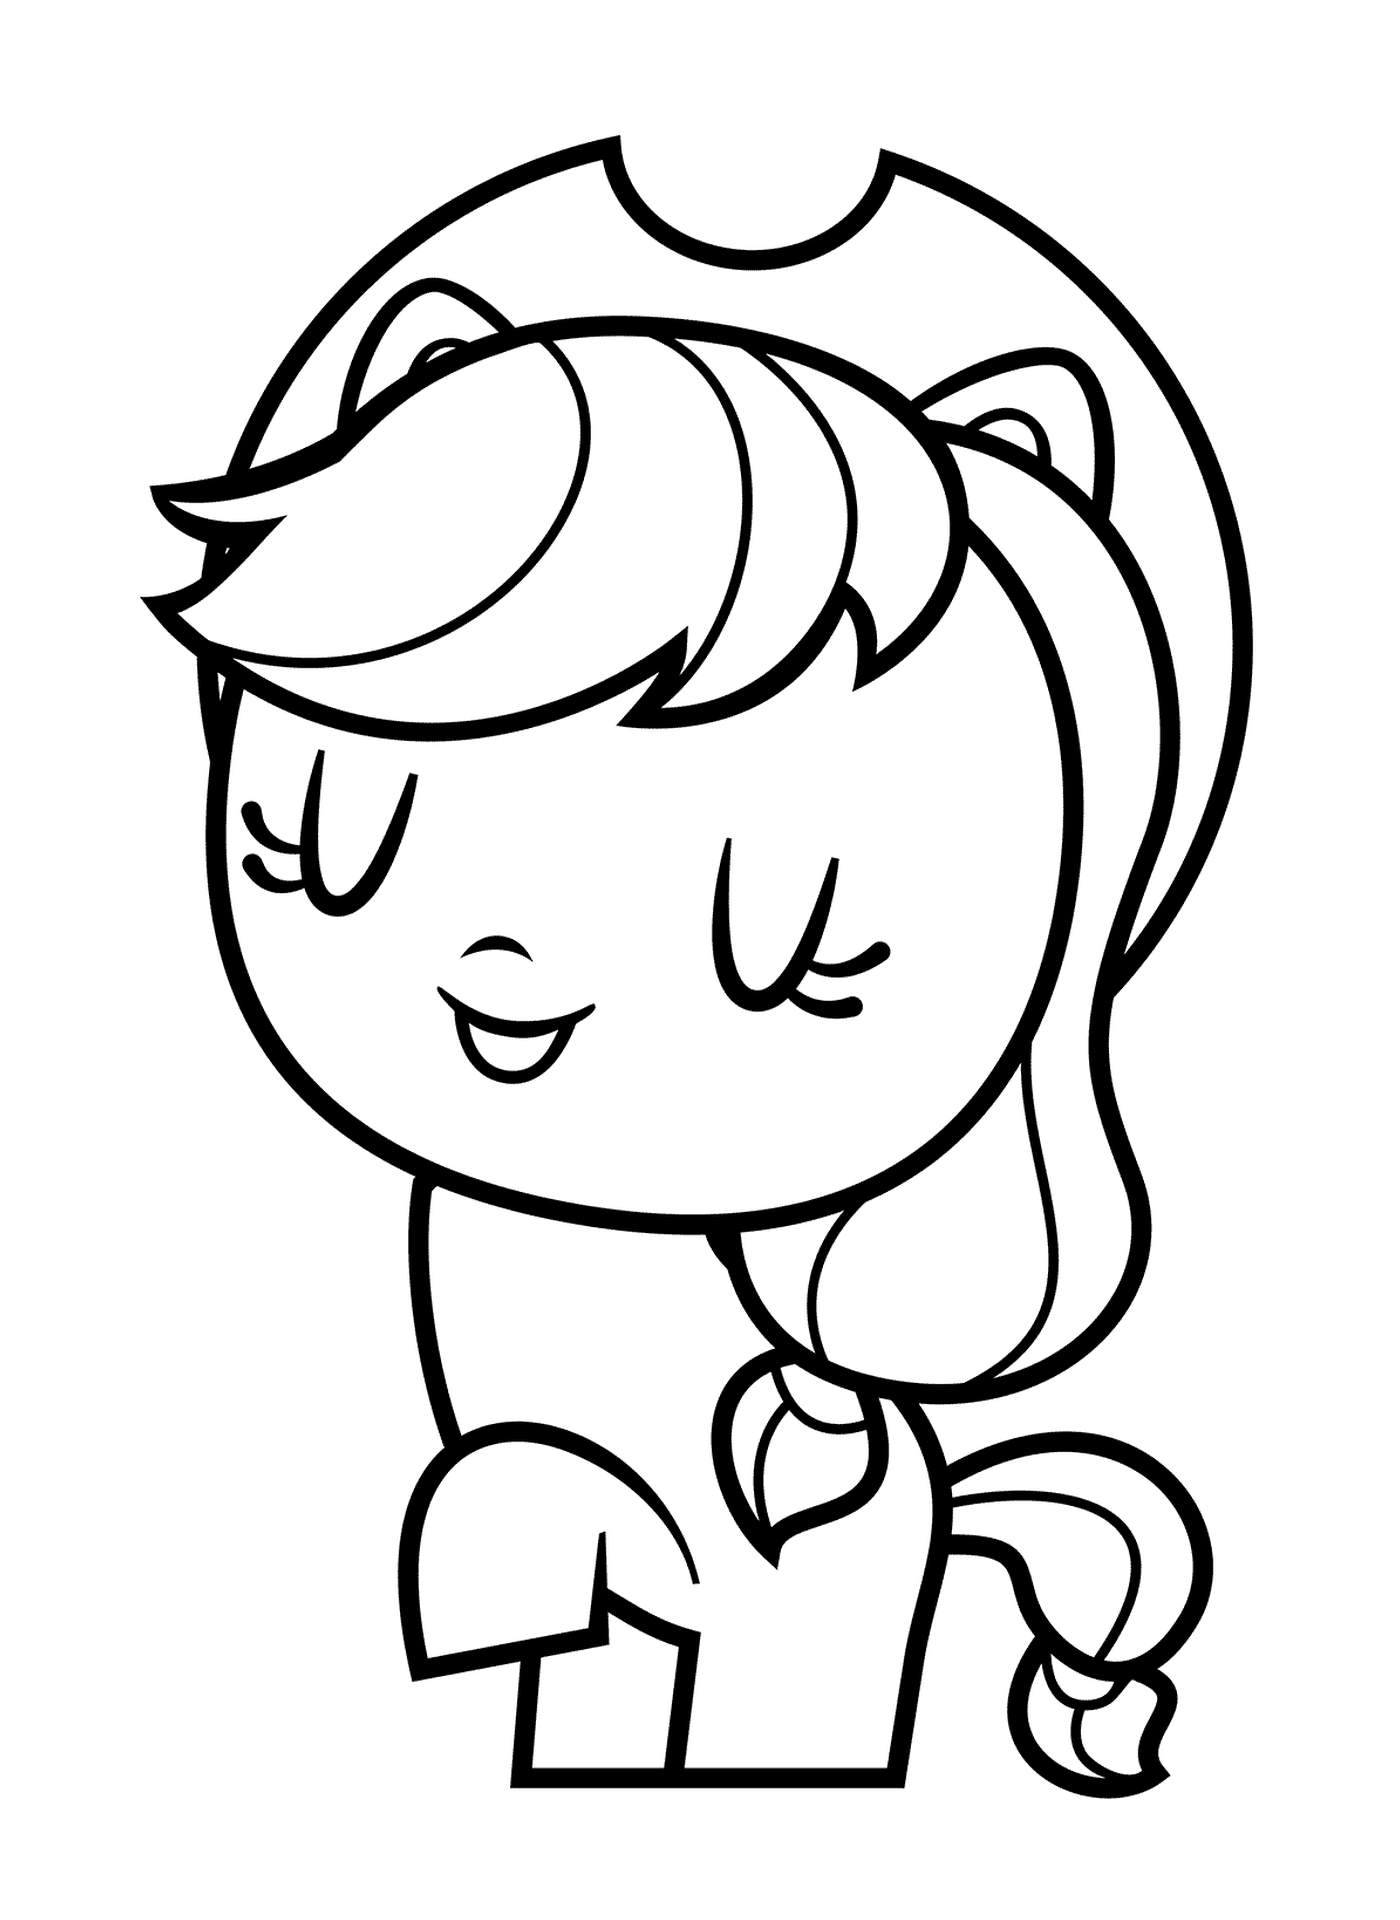  Applejack's MLP, with a little girl sitting and smiling 